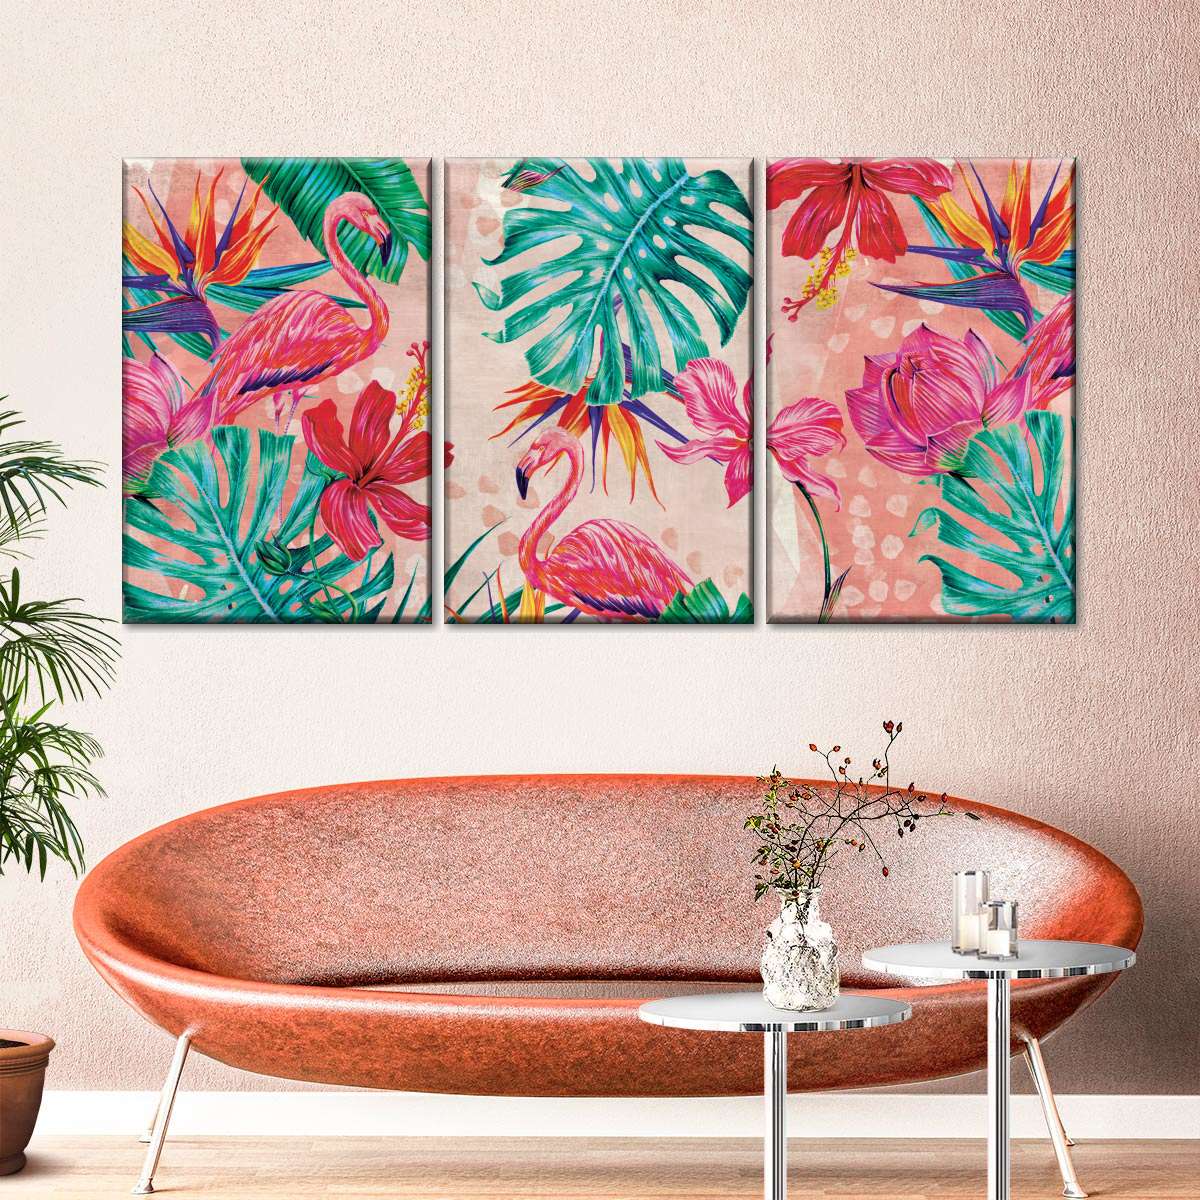 Top 5 Summer Wall Art Styles & Colors